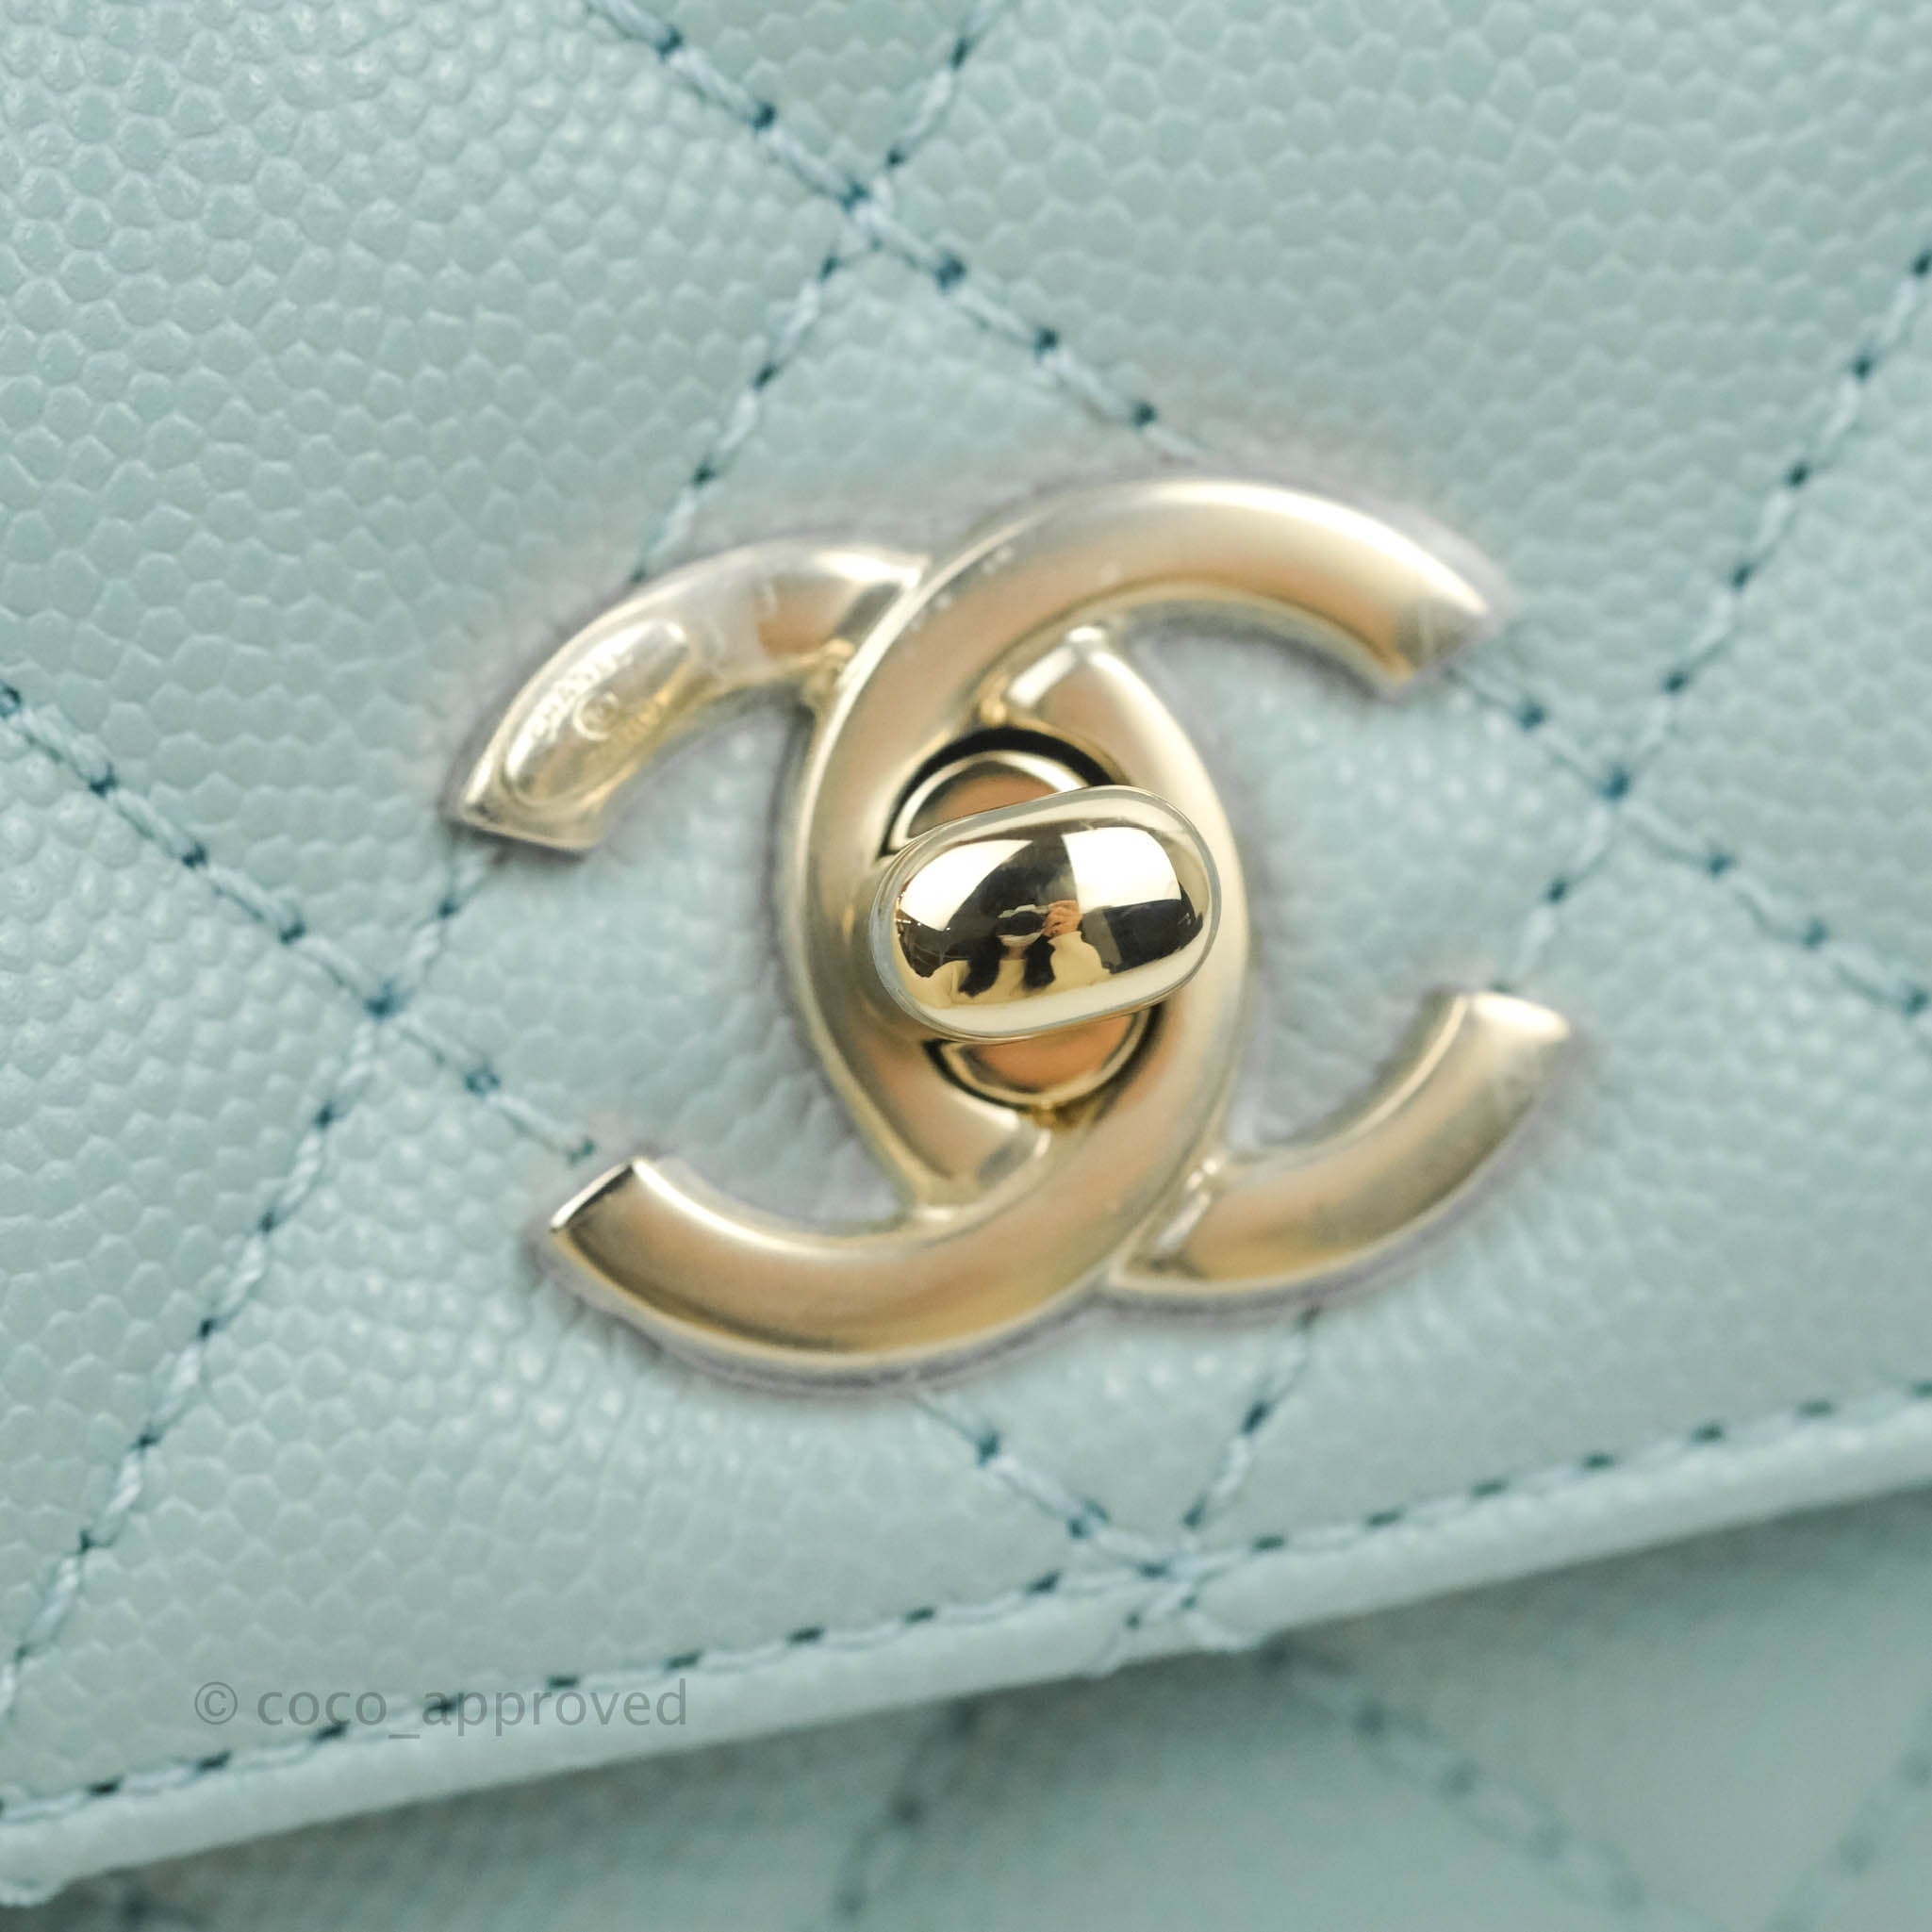 Chanel Mini Coco Handle Quilted Light Blue Caviar Gold Hardware